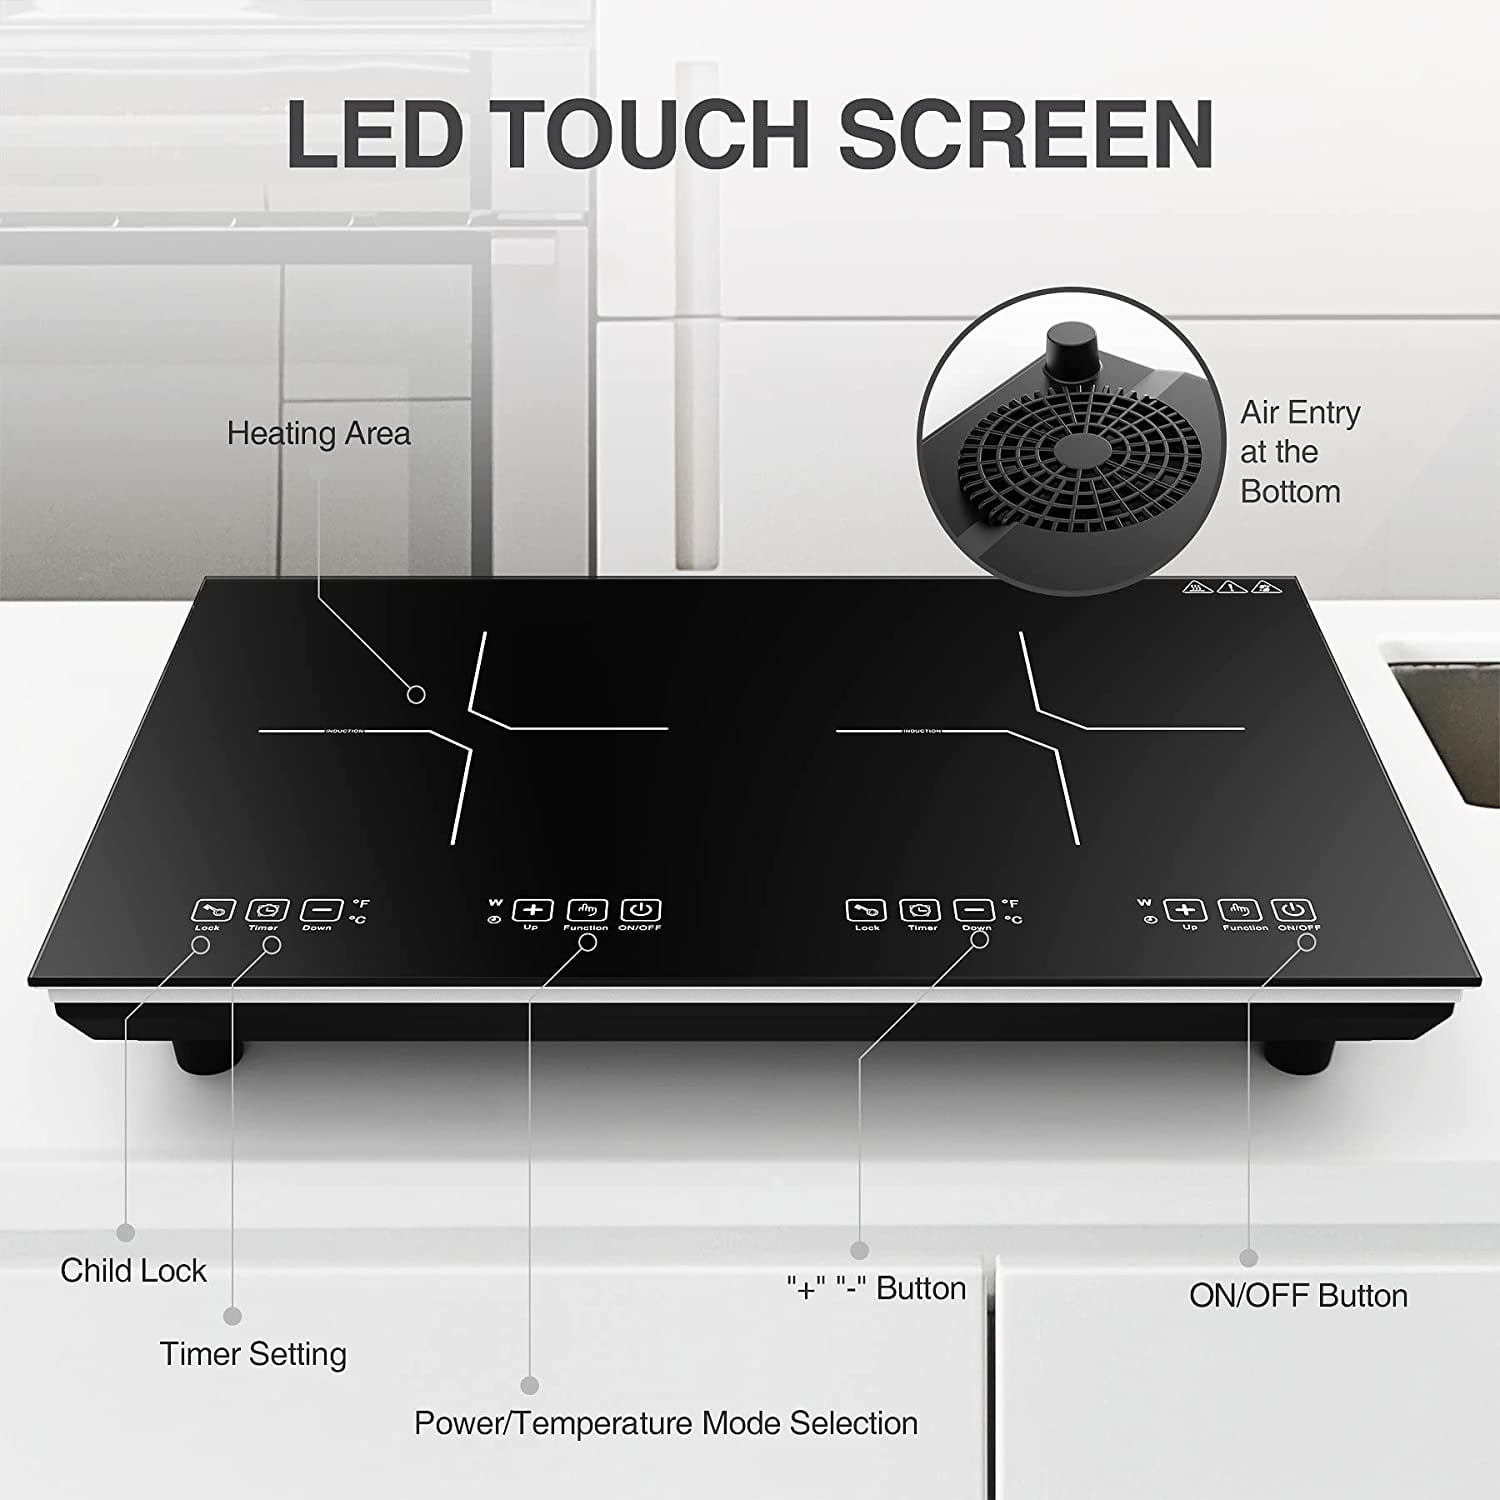 Double checking 208/240 hookup for induction cooktop : r